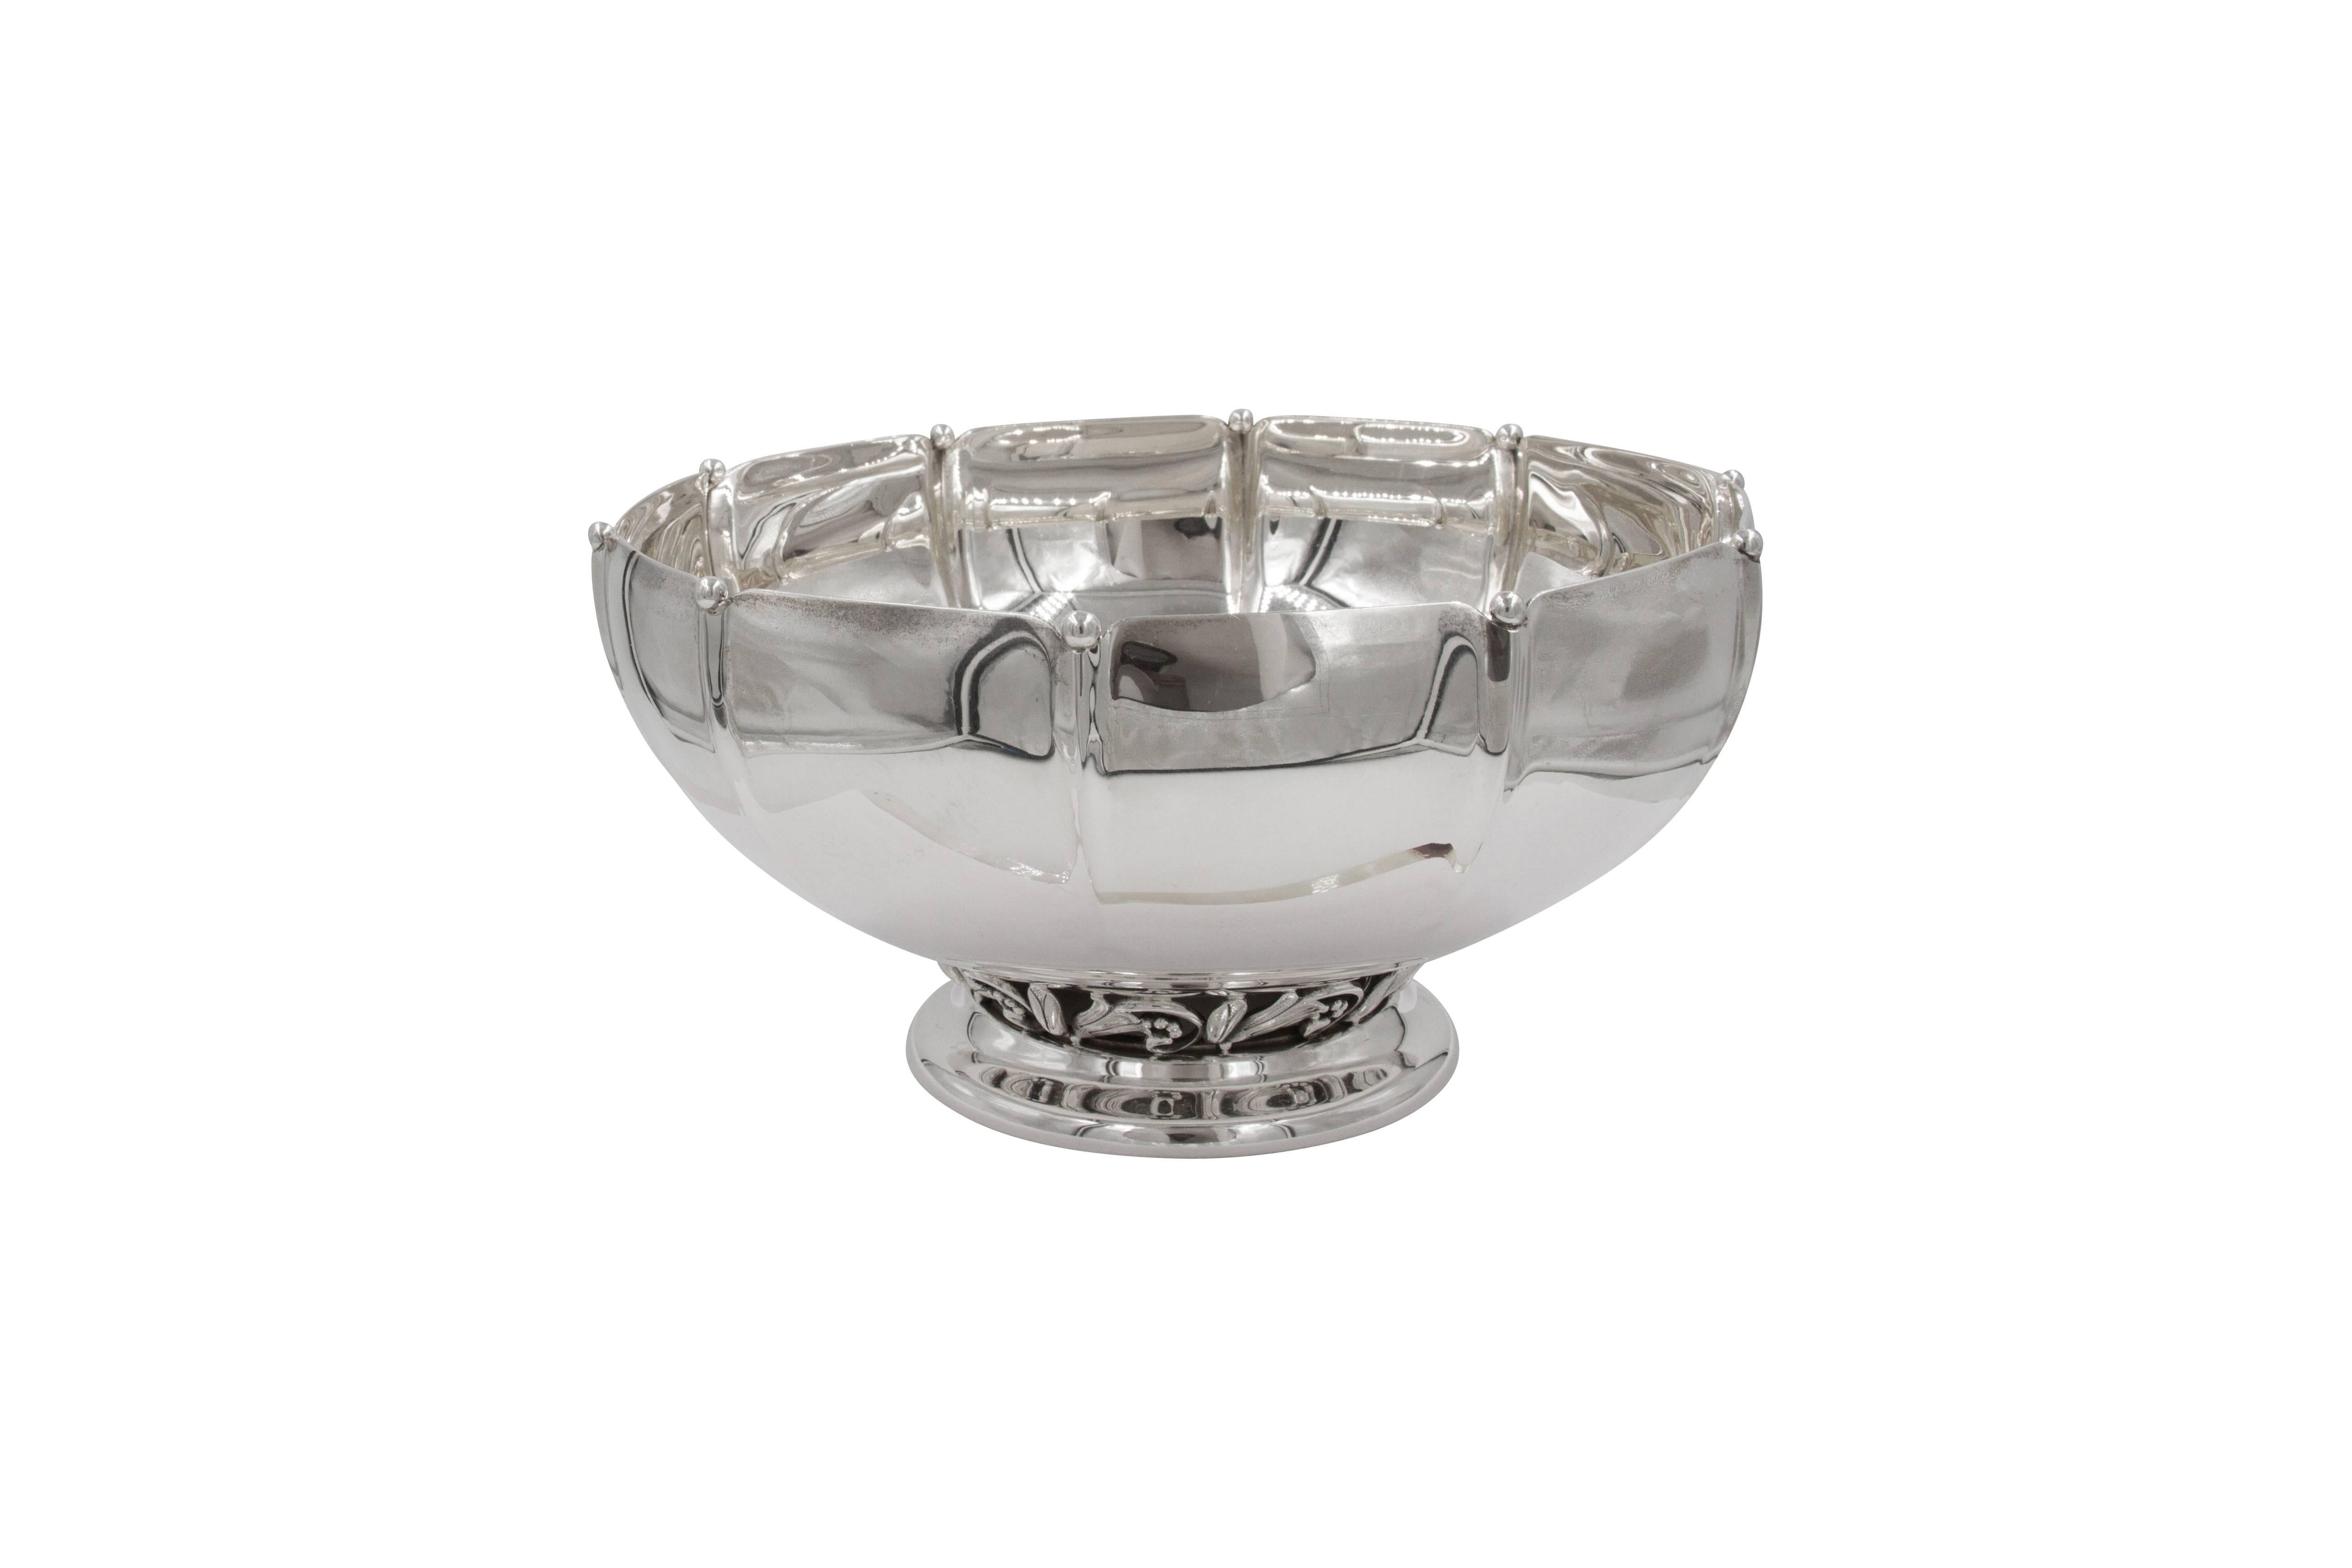 Proudly offering a three-piece suite by Hamilton Silver Company; a pair of candlesticks and matching centerpiece bowl. This Art Deco trio is quite fetching. The candlesticks are colonnade shaped and have cut-out work both on top around the neck and